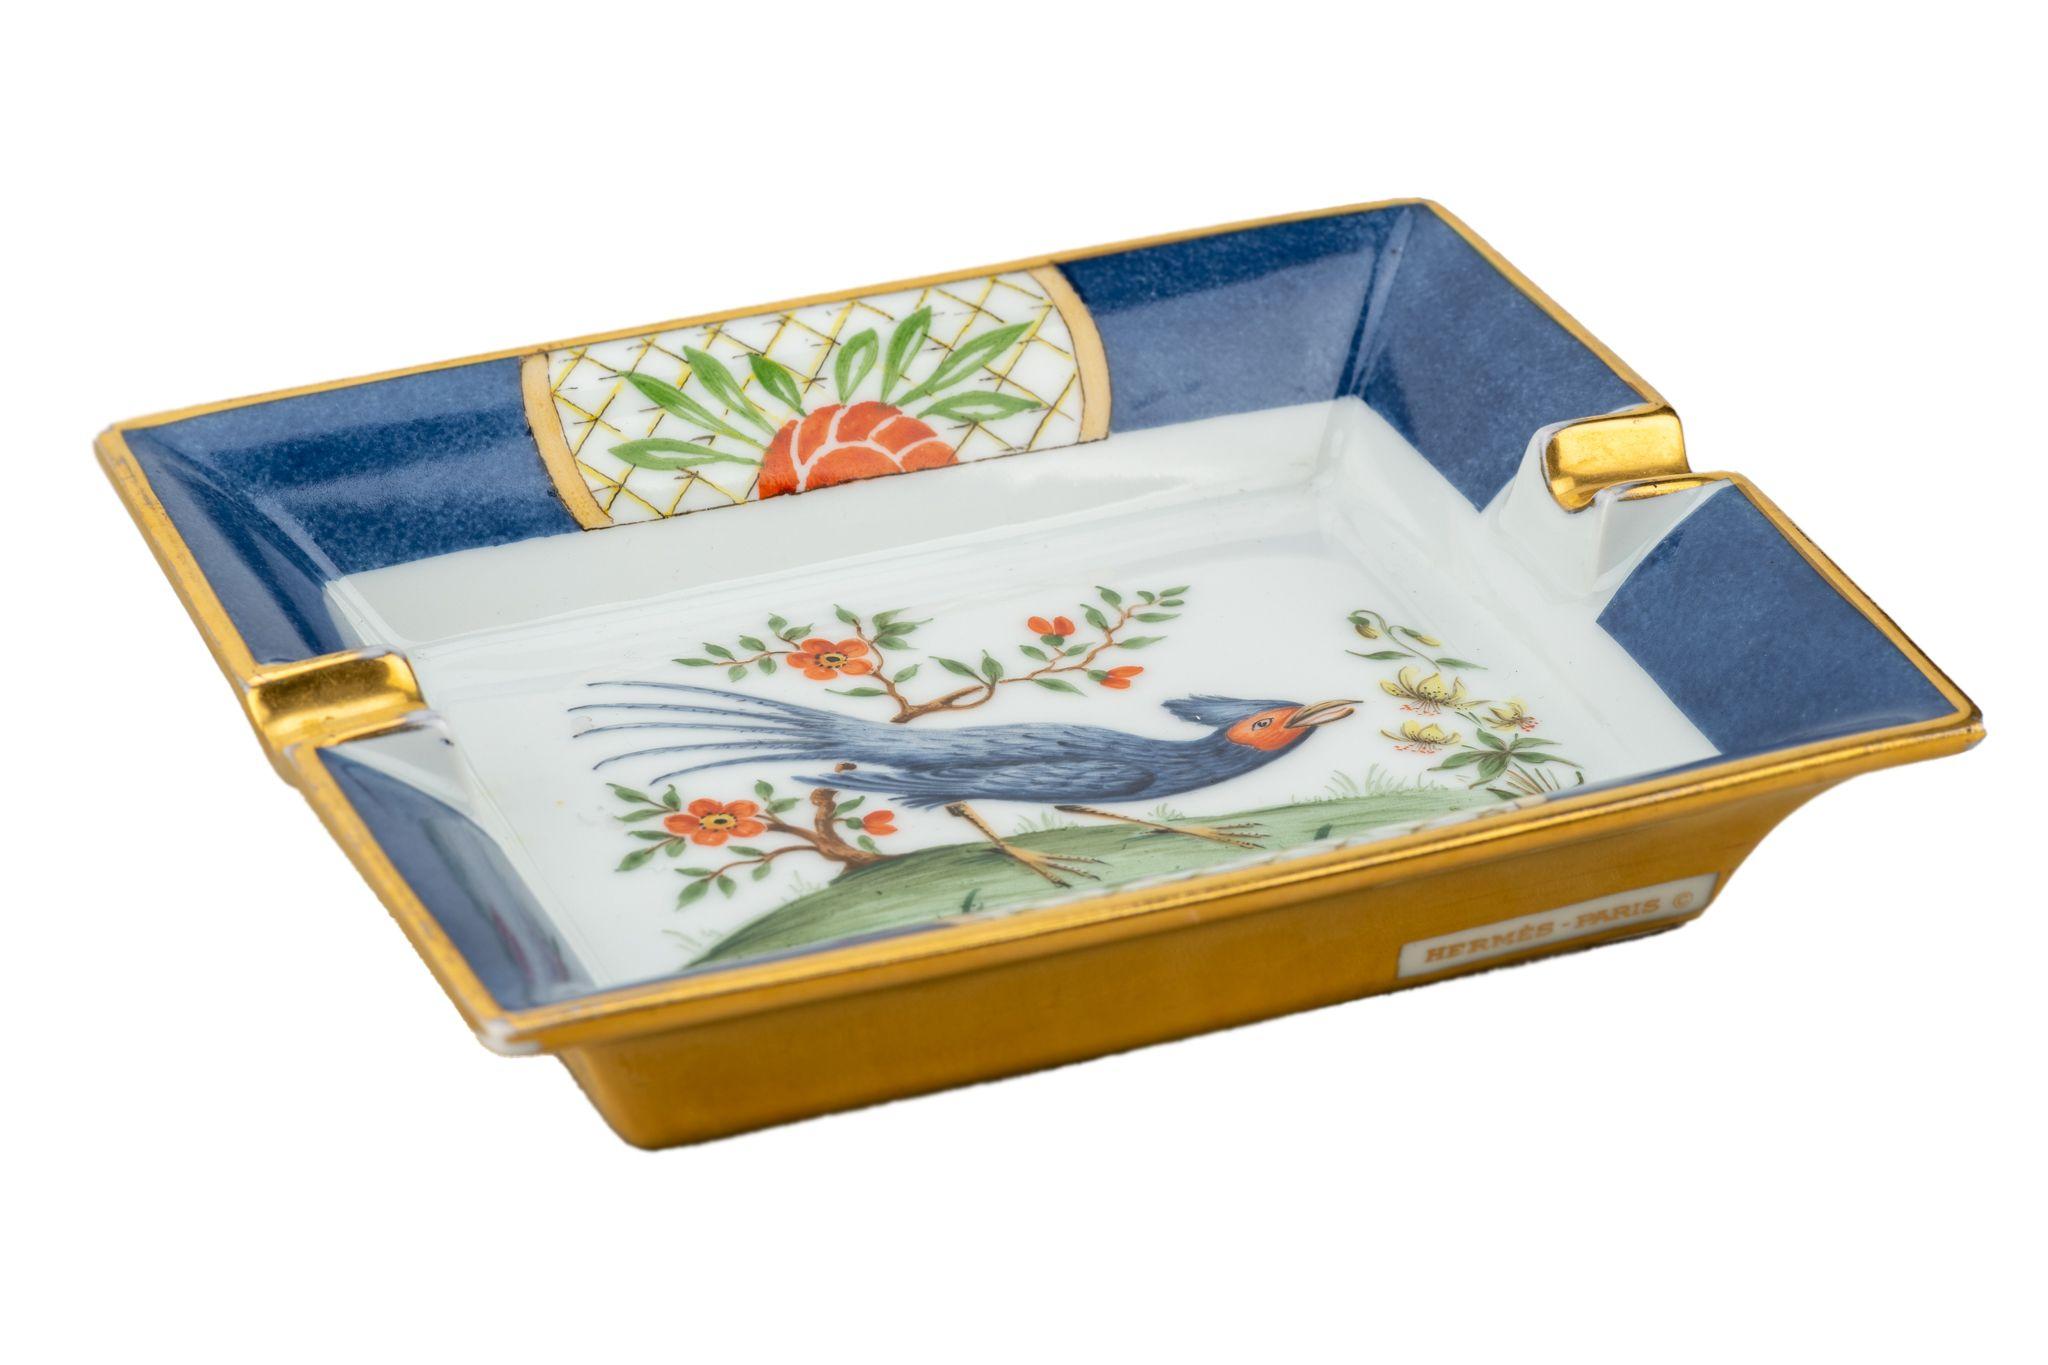 Hermes Blue Bird Porcelain Ashtray In Excellent Condition For Sale In West Hollywood, CA